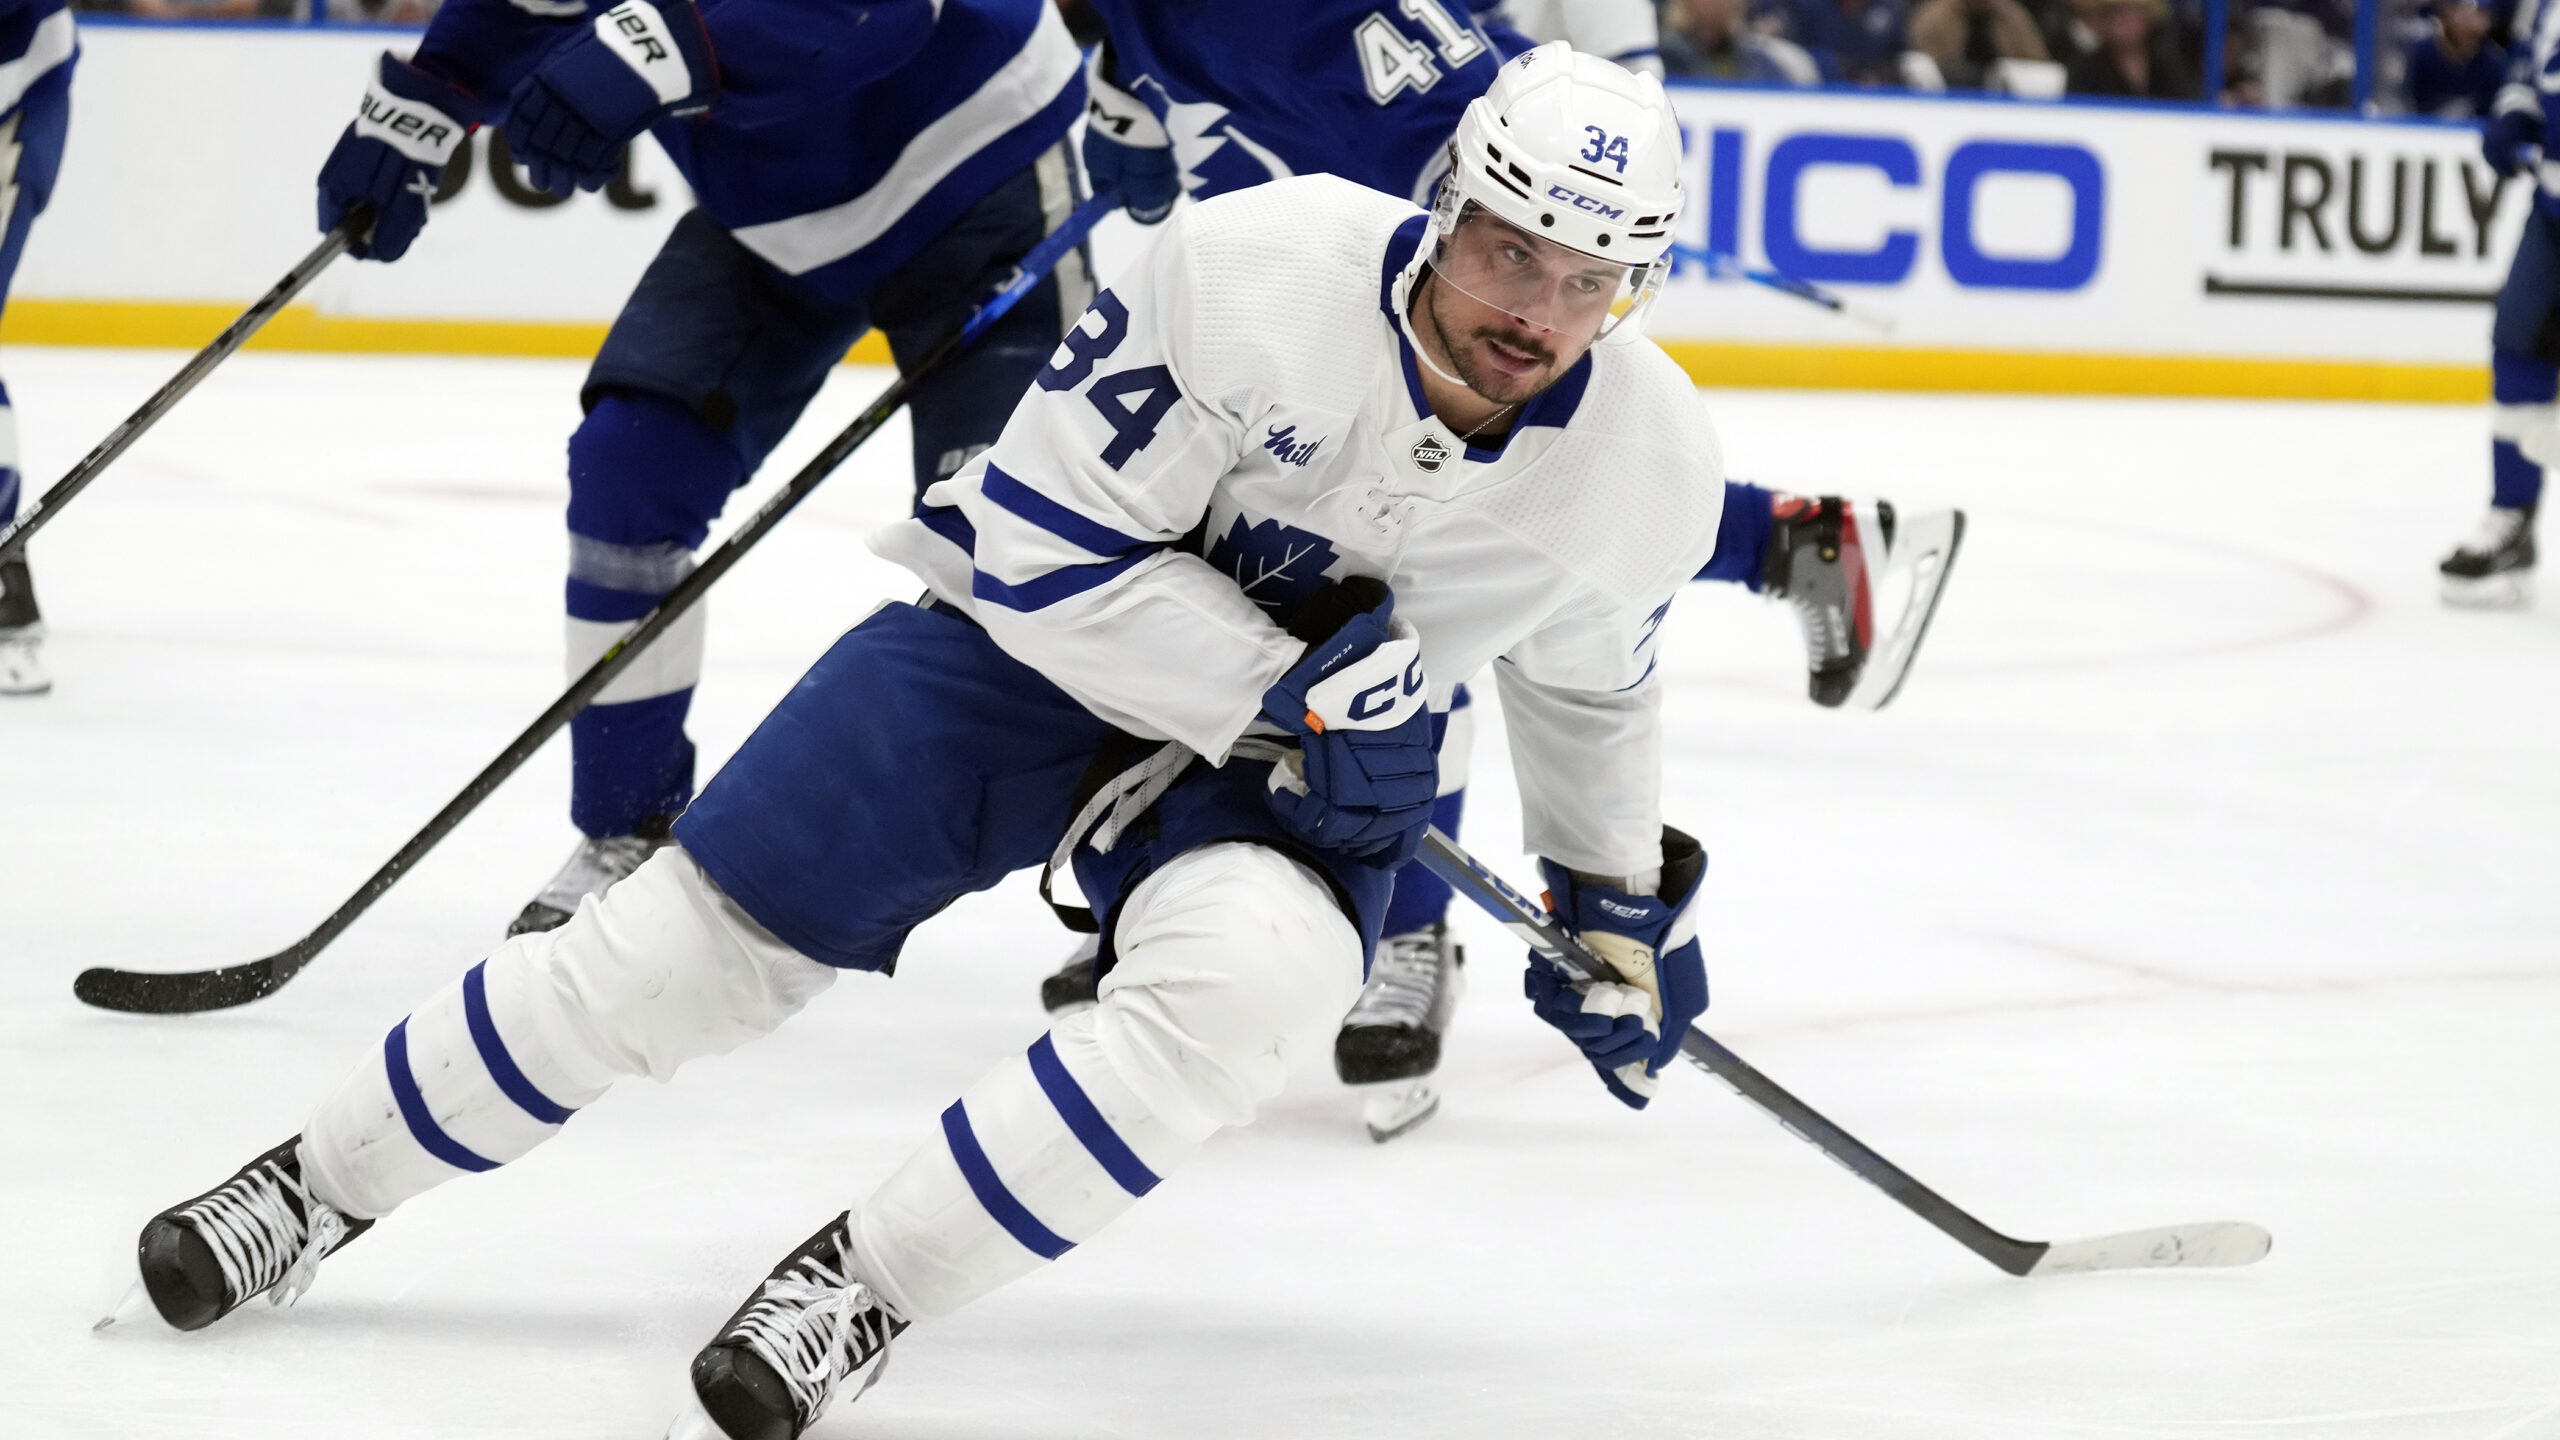 Toronto Maple Leafs at Los Angeles Kings - Game #9 Preview